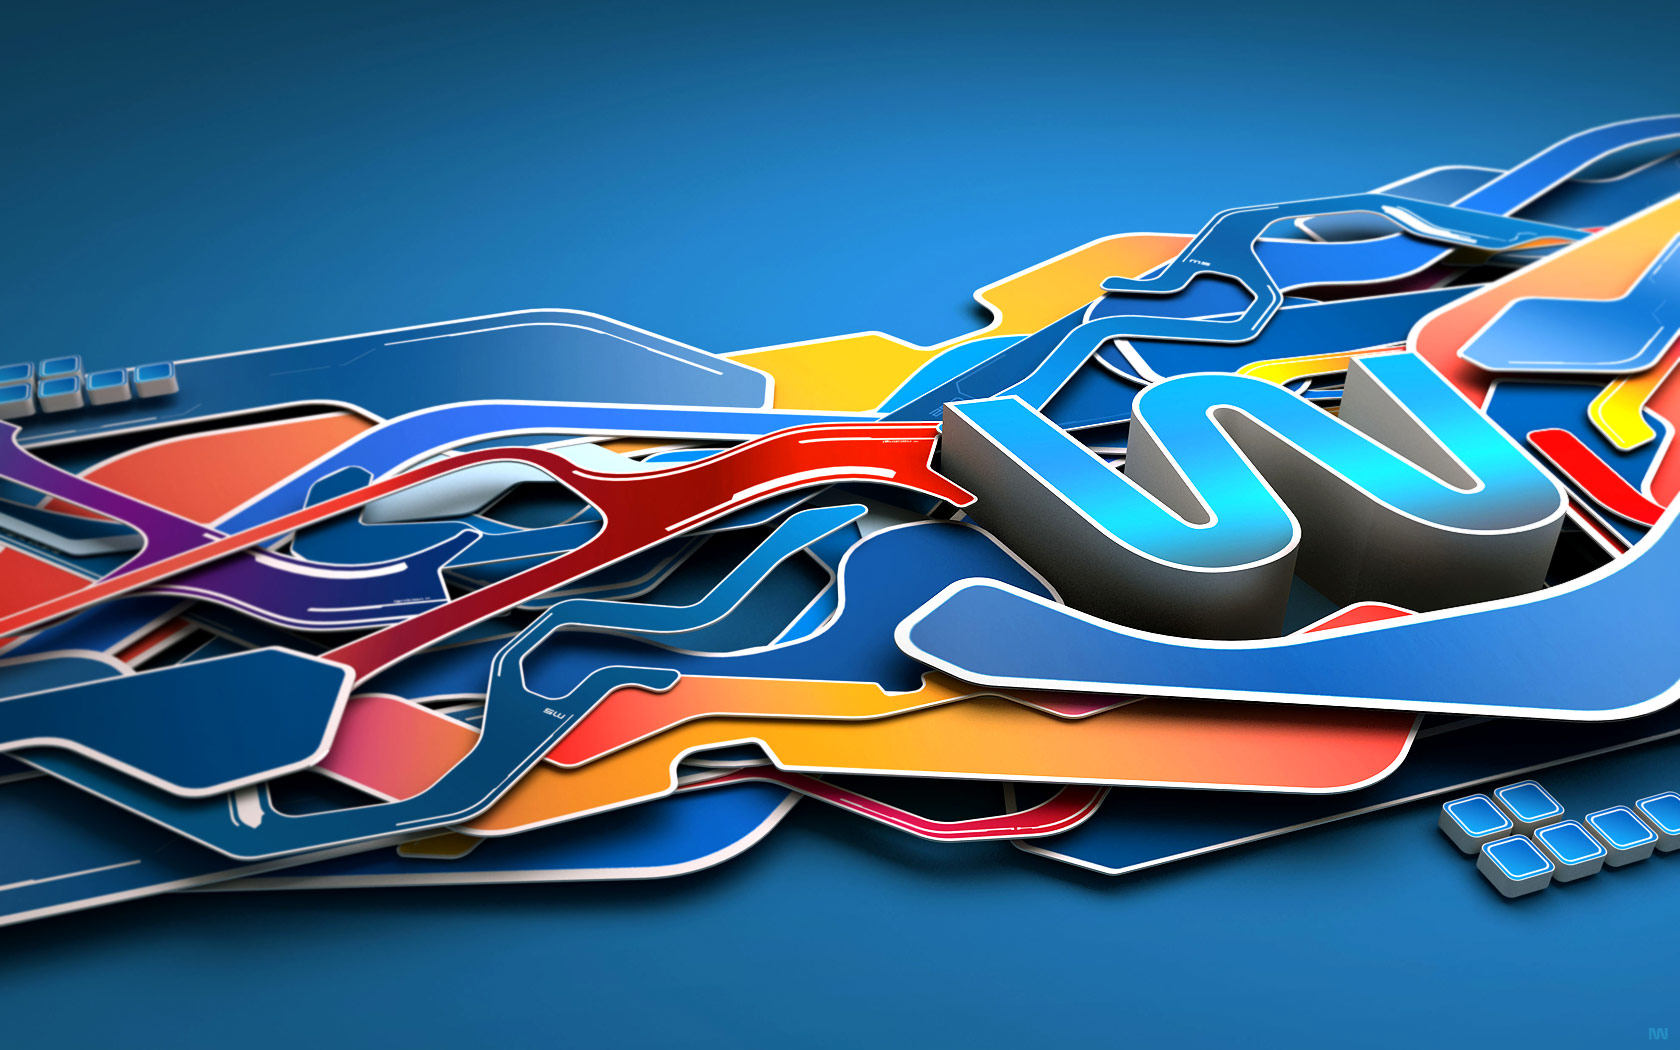 Cool 3D Abstract Graphic Design